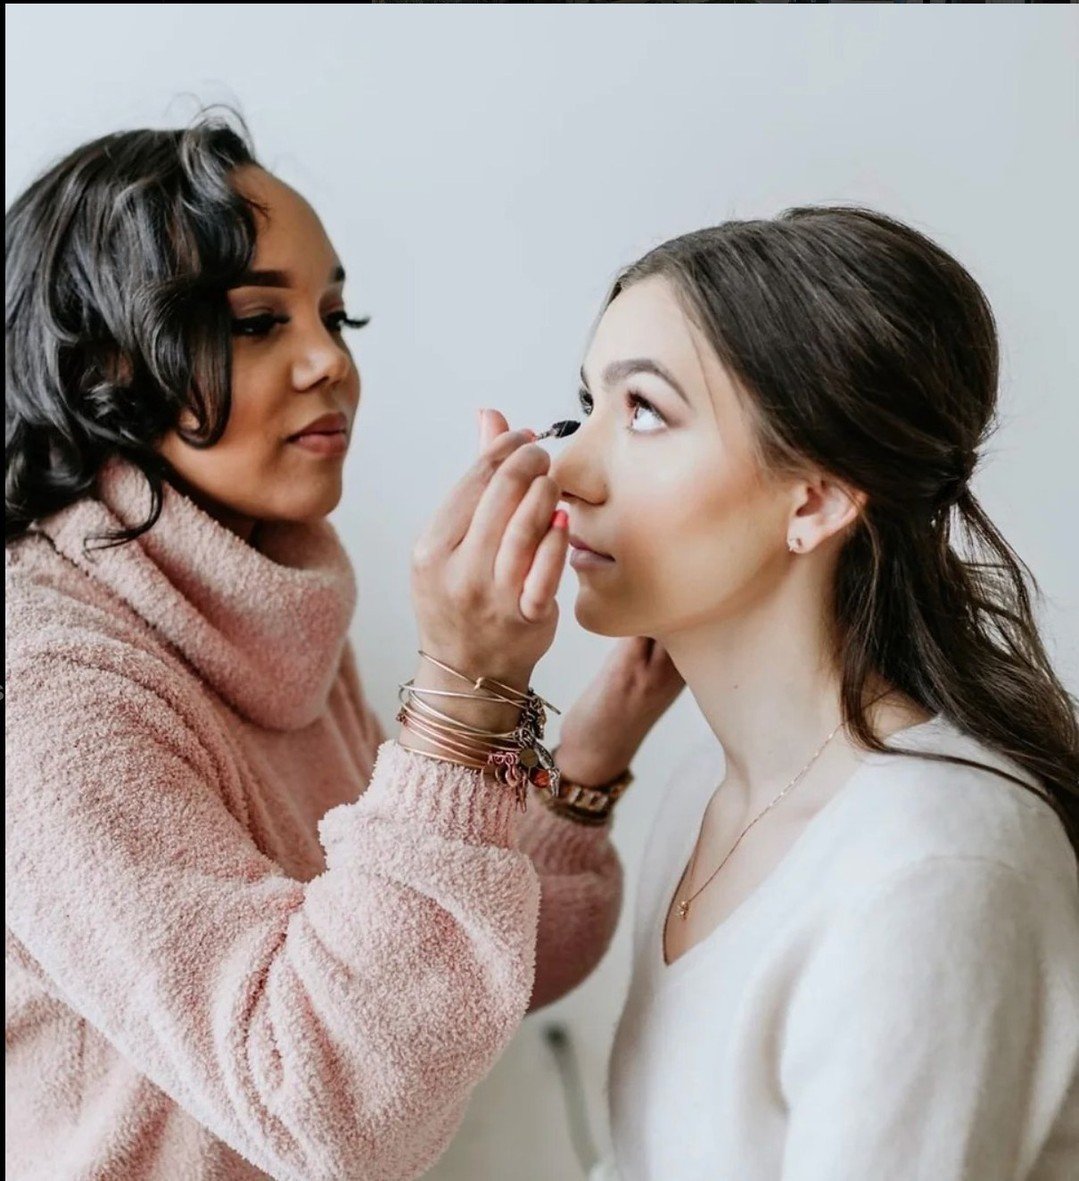 Prom day is just around the corner, and we've got the ultimate glam solution for you: @theblushgallery! 💖 They're here to treat you and your friends to a day of picture-perfect makeup services that will have you looking absolutely stunning! 📸🌟

#c